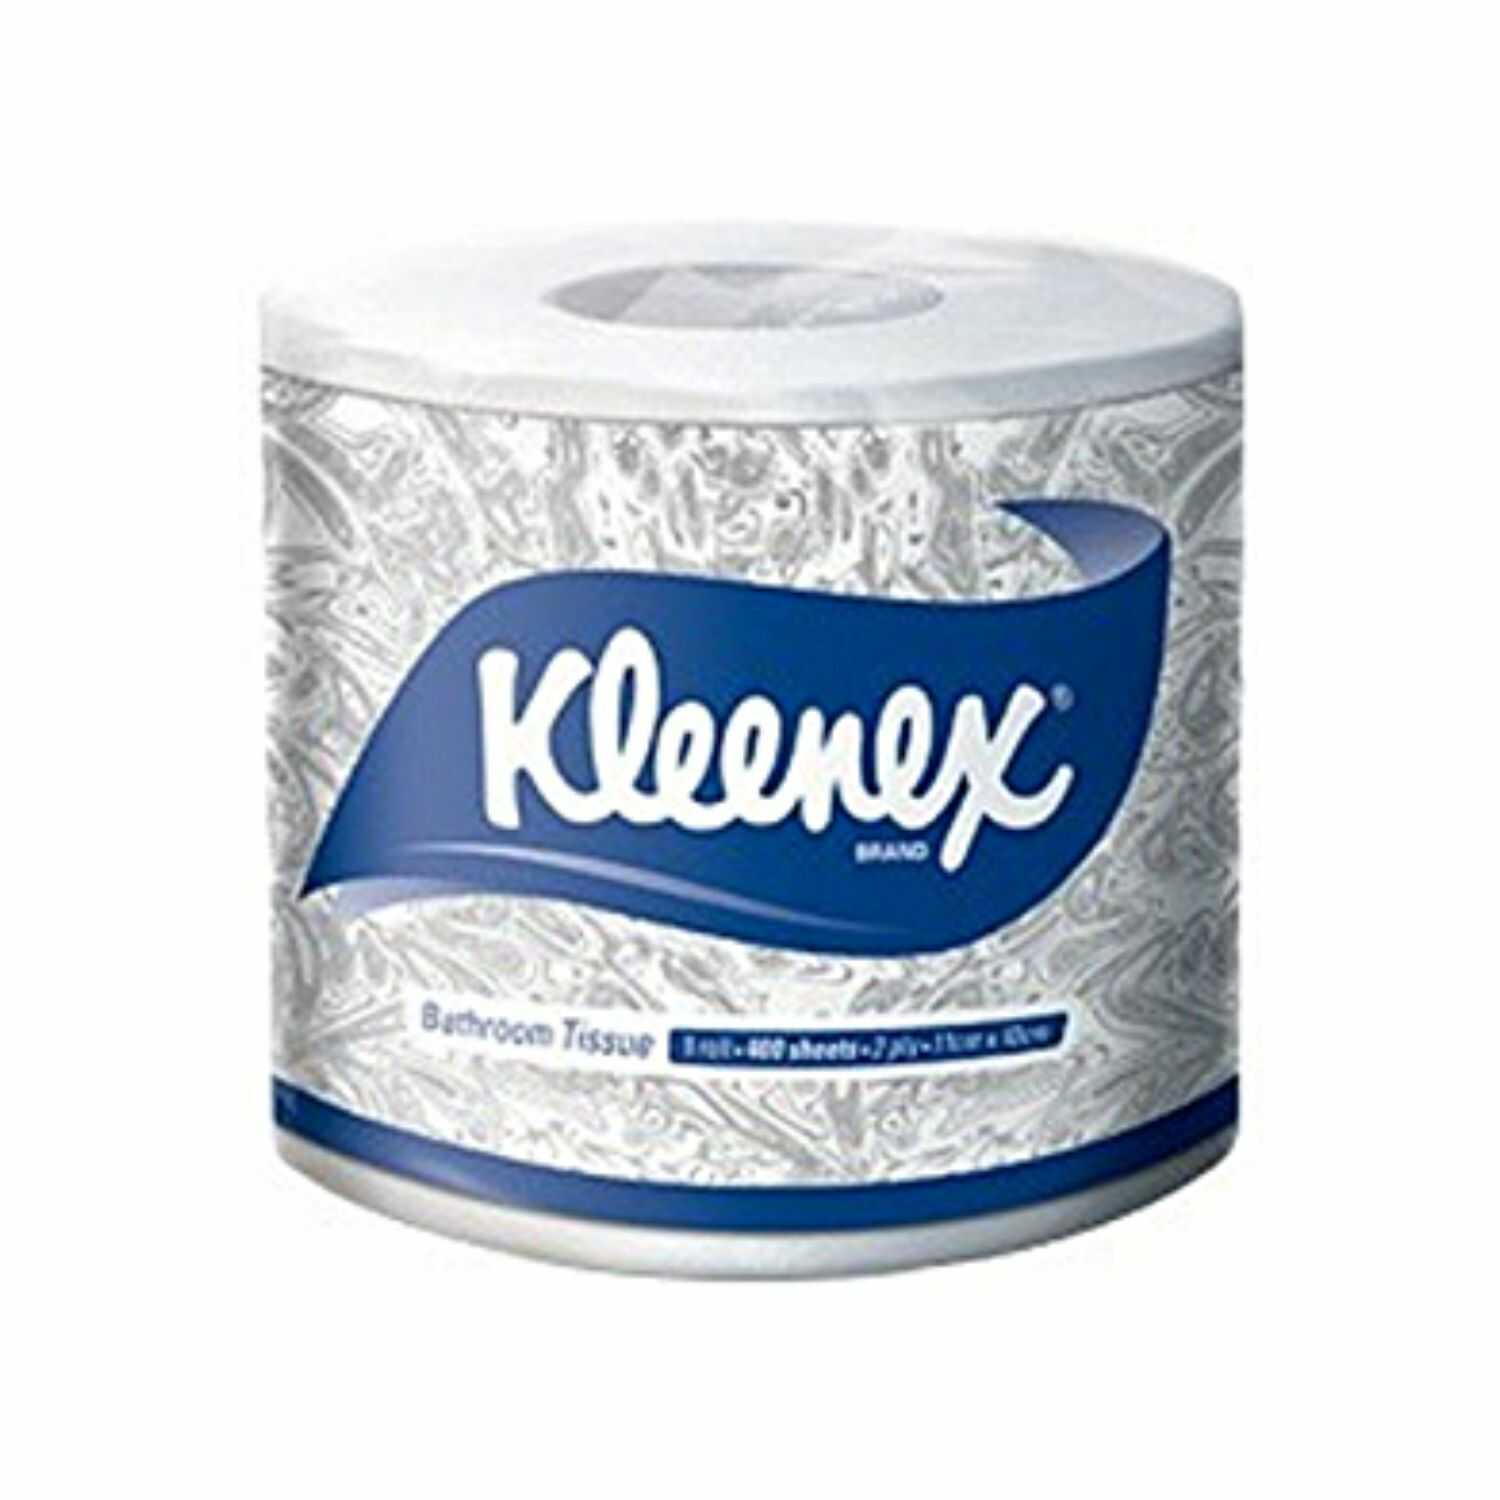 Kimberly Clark* Kleenex* Bathroom Tissue Roll, 3610 (Pack of 120 Rolls/Case, 160 Sheets/Pack, Total 19,200 Sheets )